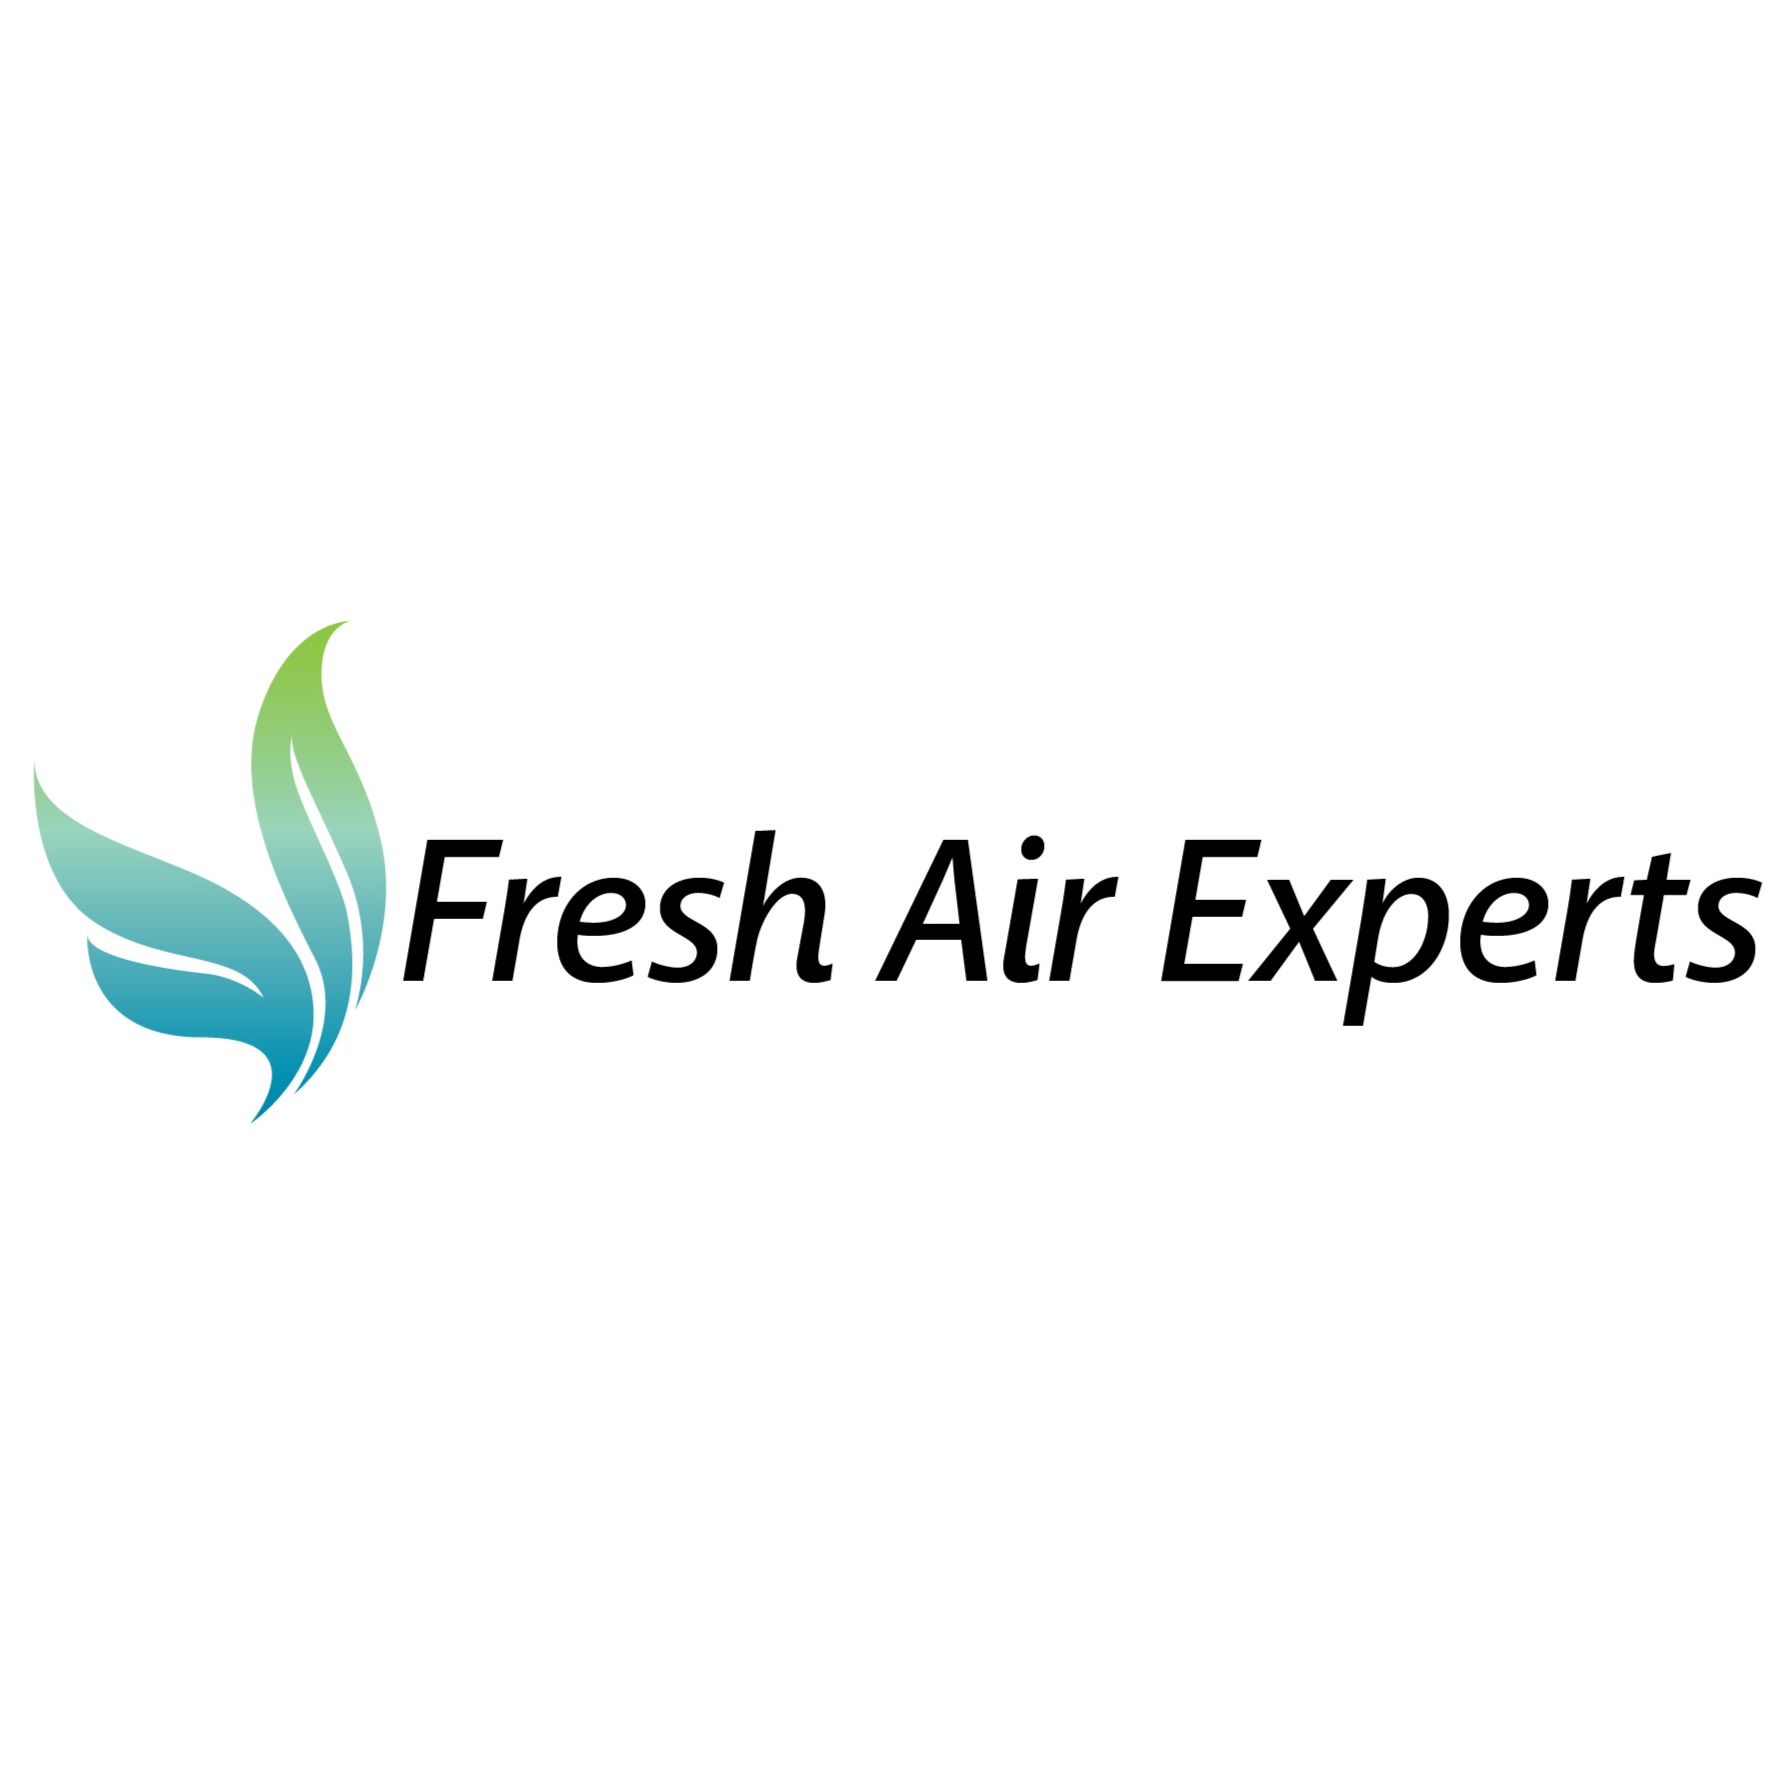 Fresh Air Experts Disinfecting Spray Service powered by SanitizeIT Logo